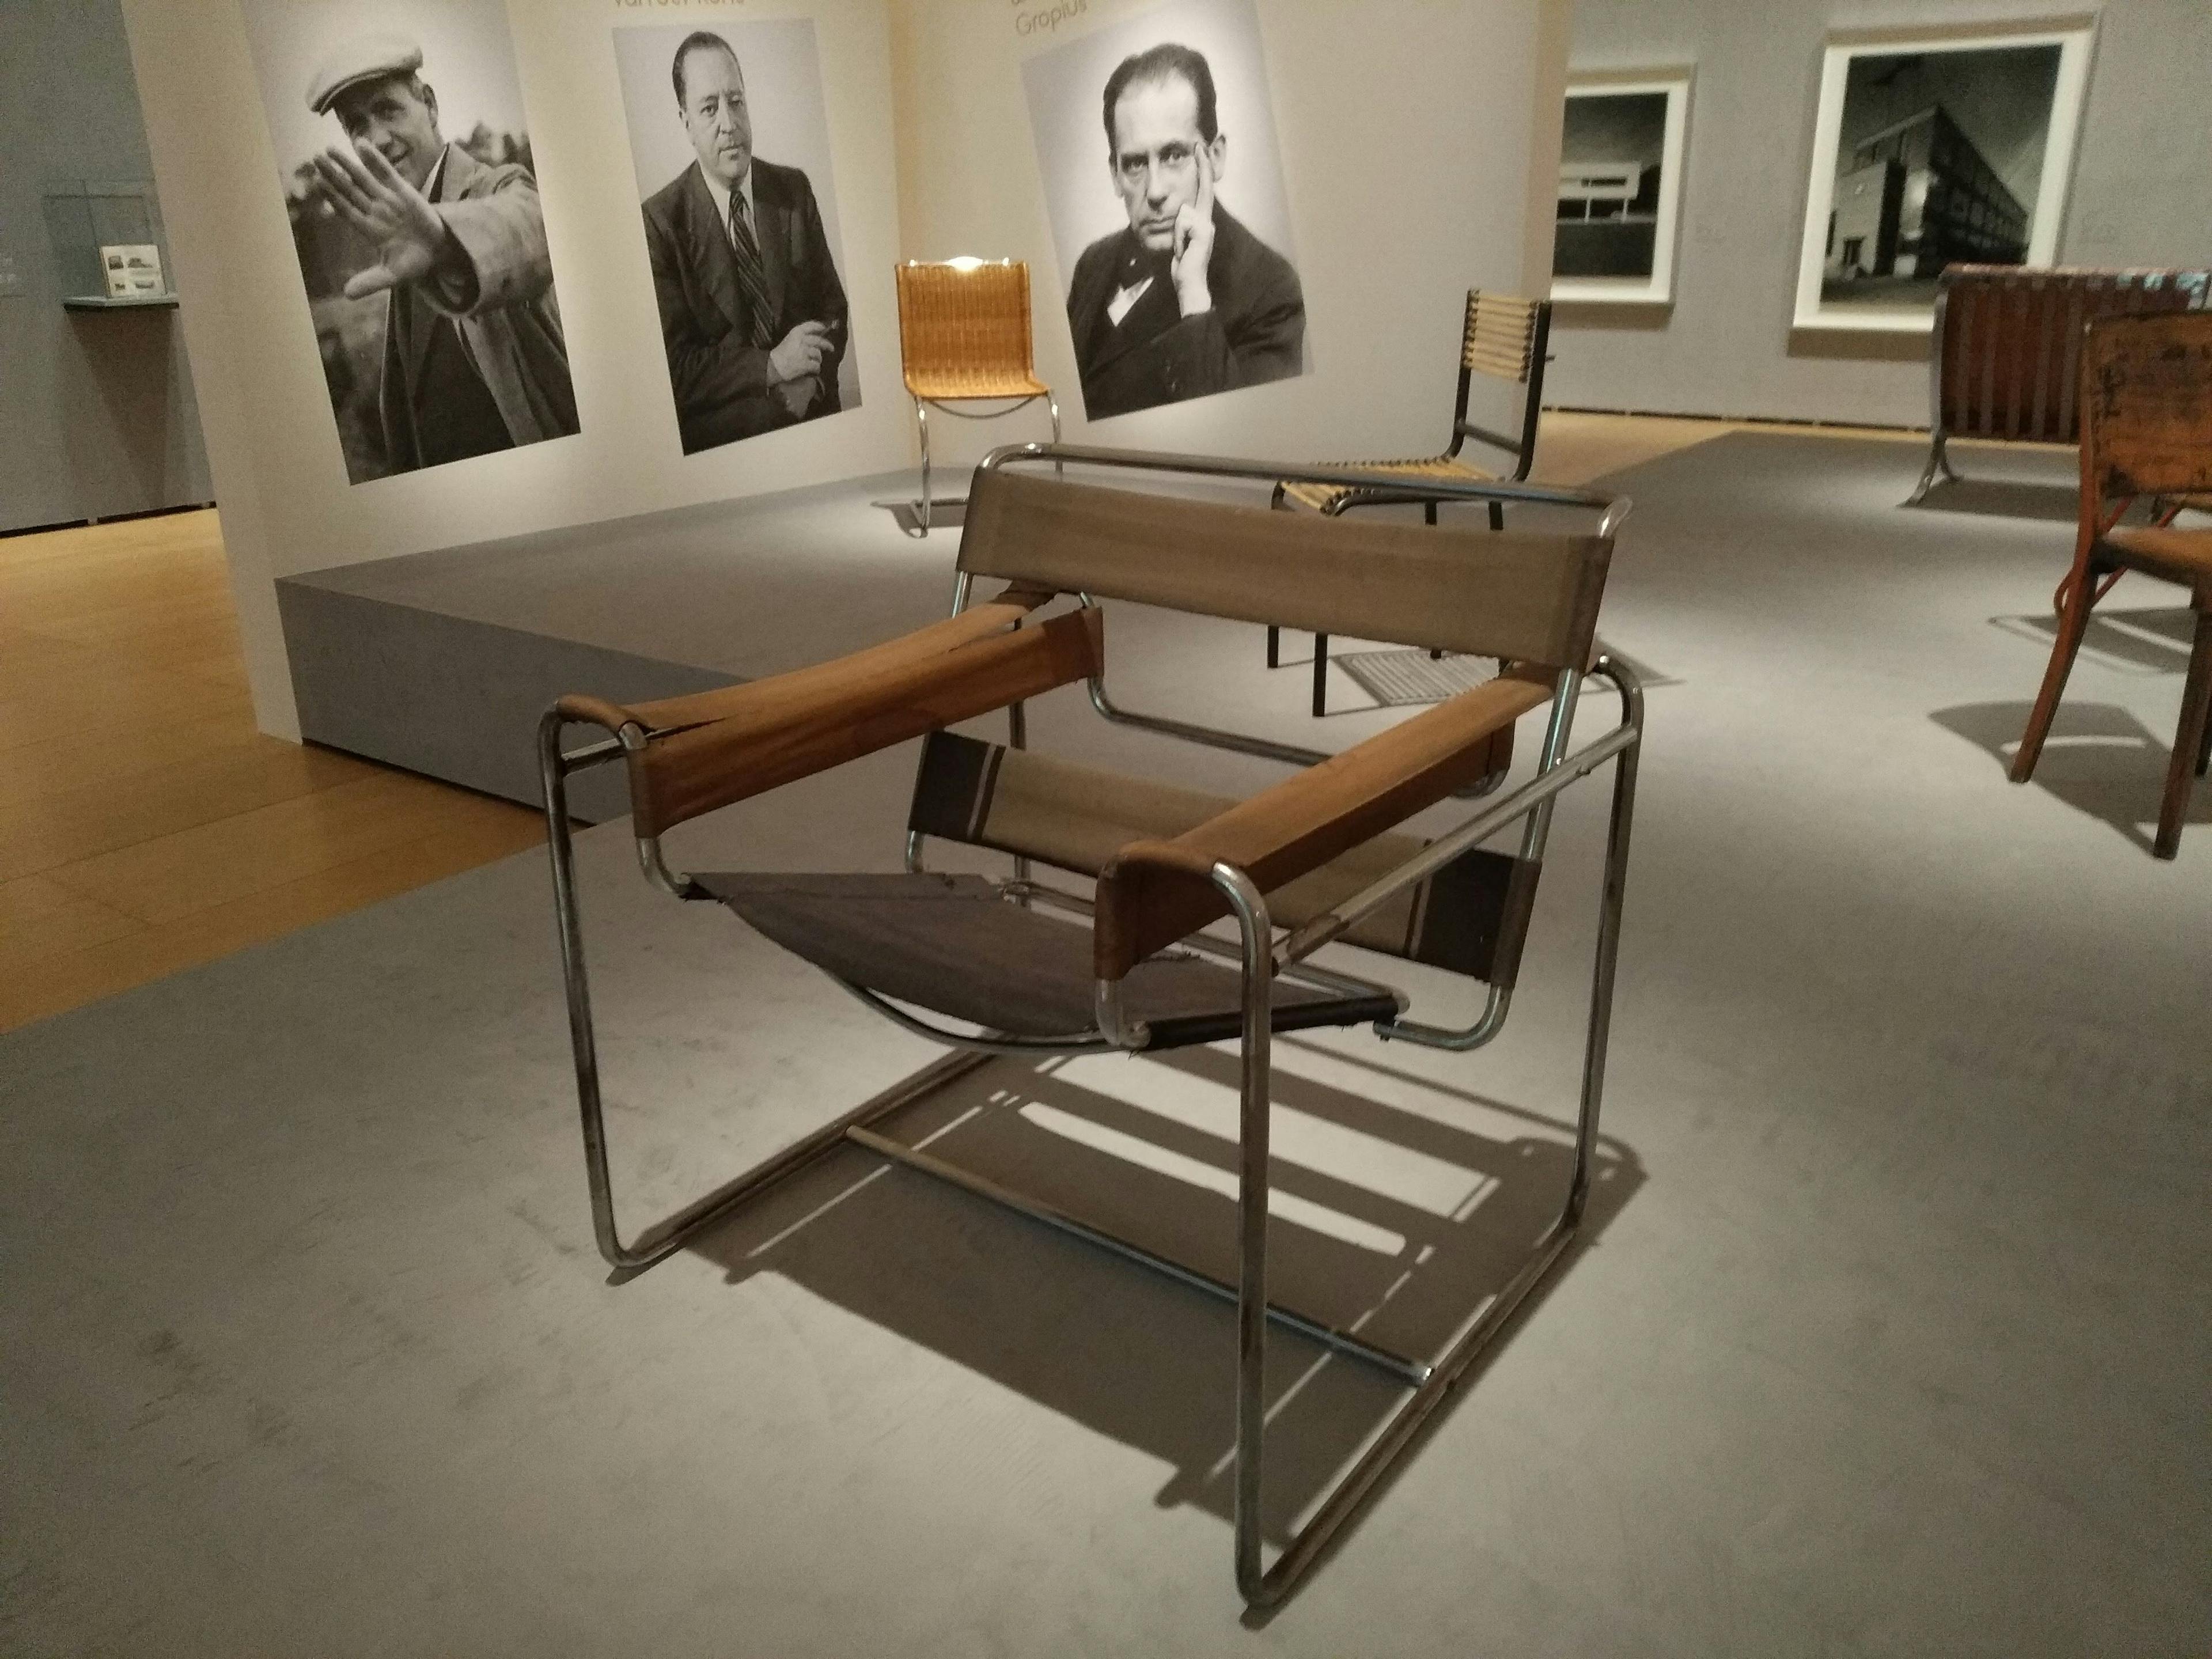 Marcel Breuer’s Wassily Chair main image